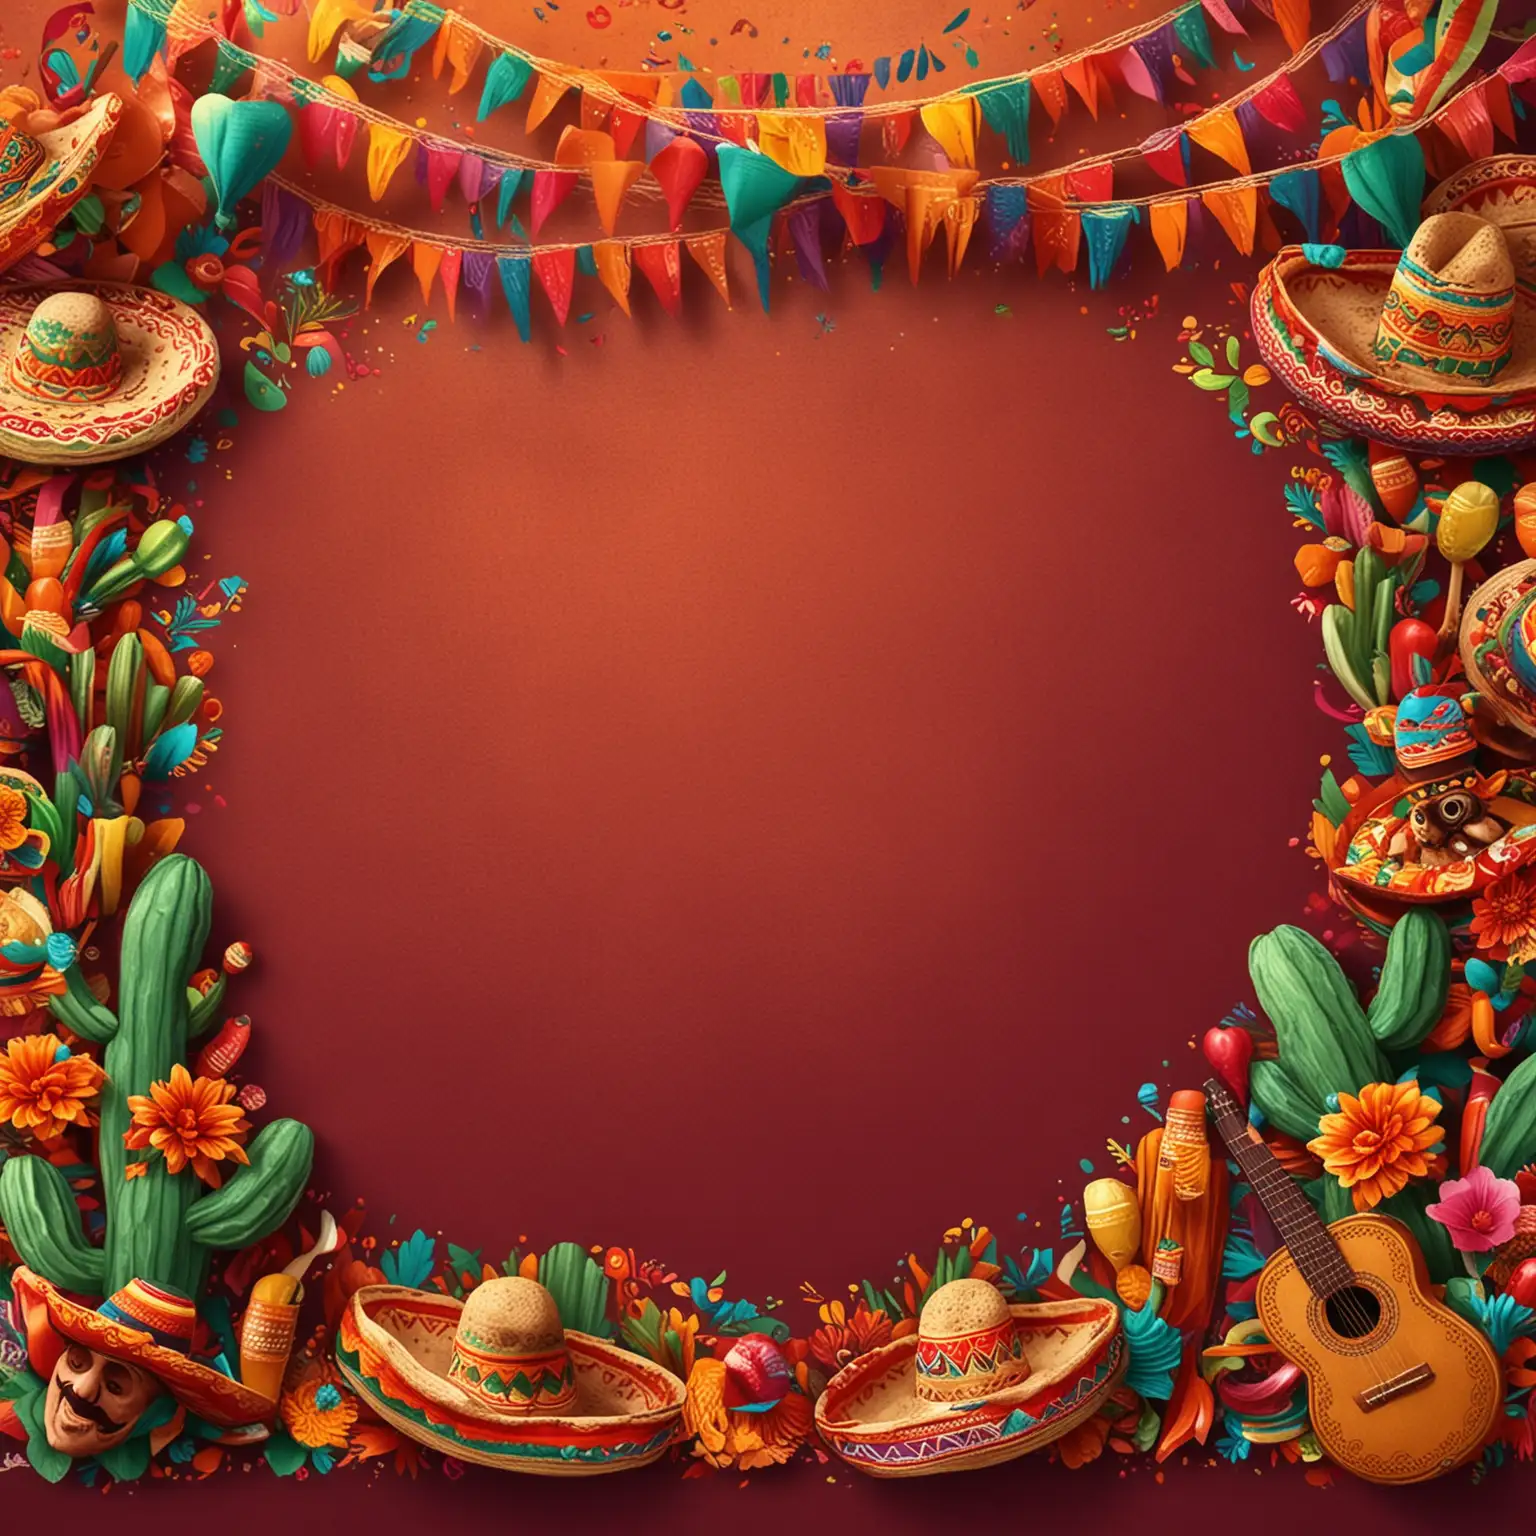 create a background that has a mexican celebration theme